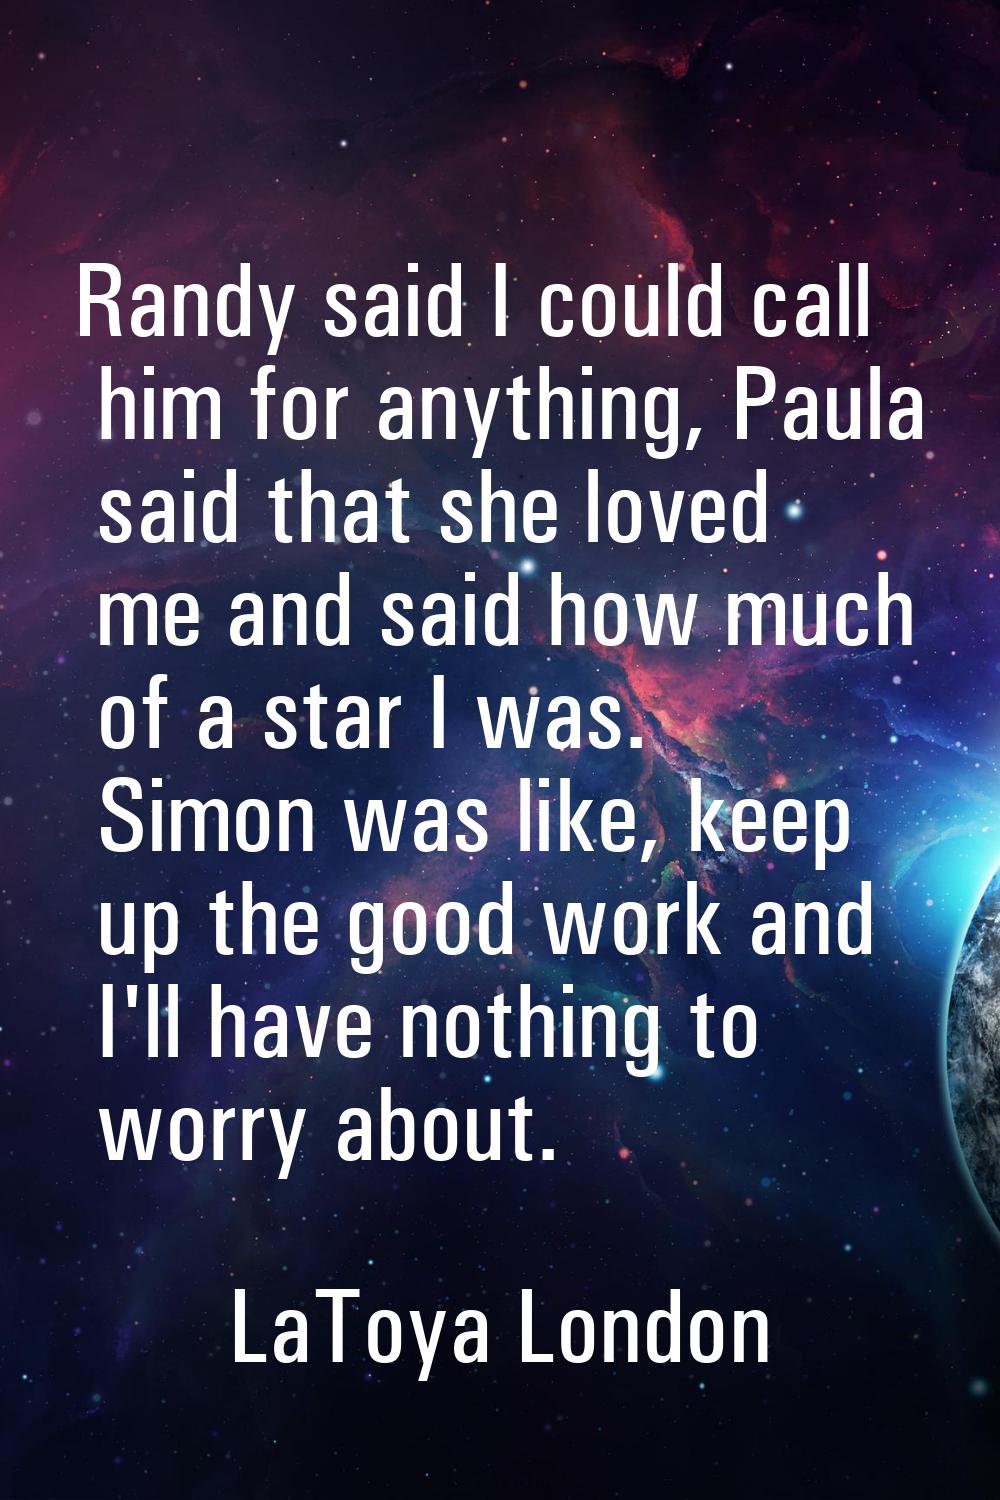 Randy said I could call him for anything, Paula said that she loved me and said how much of a star 